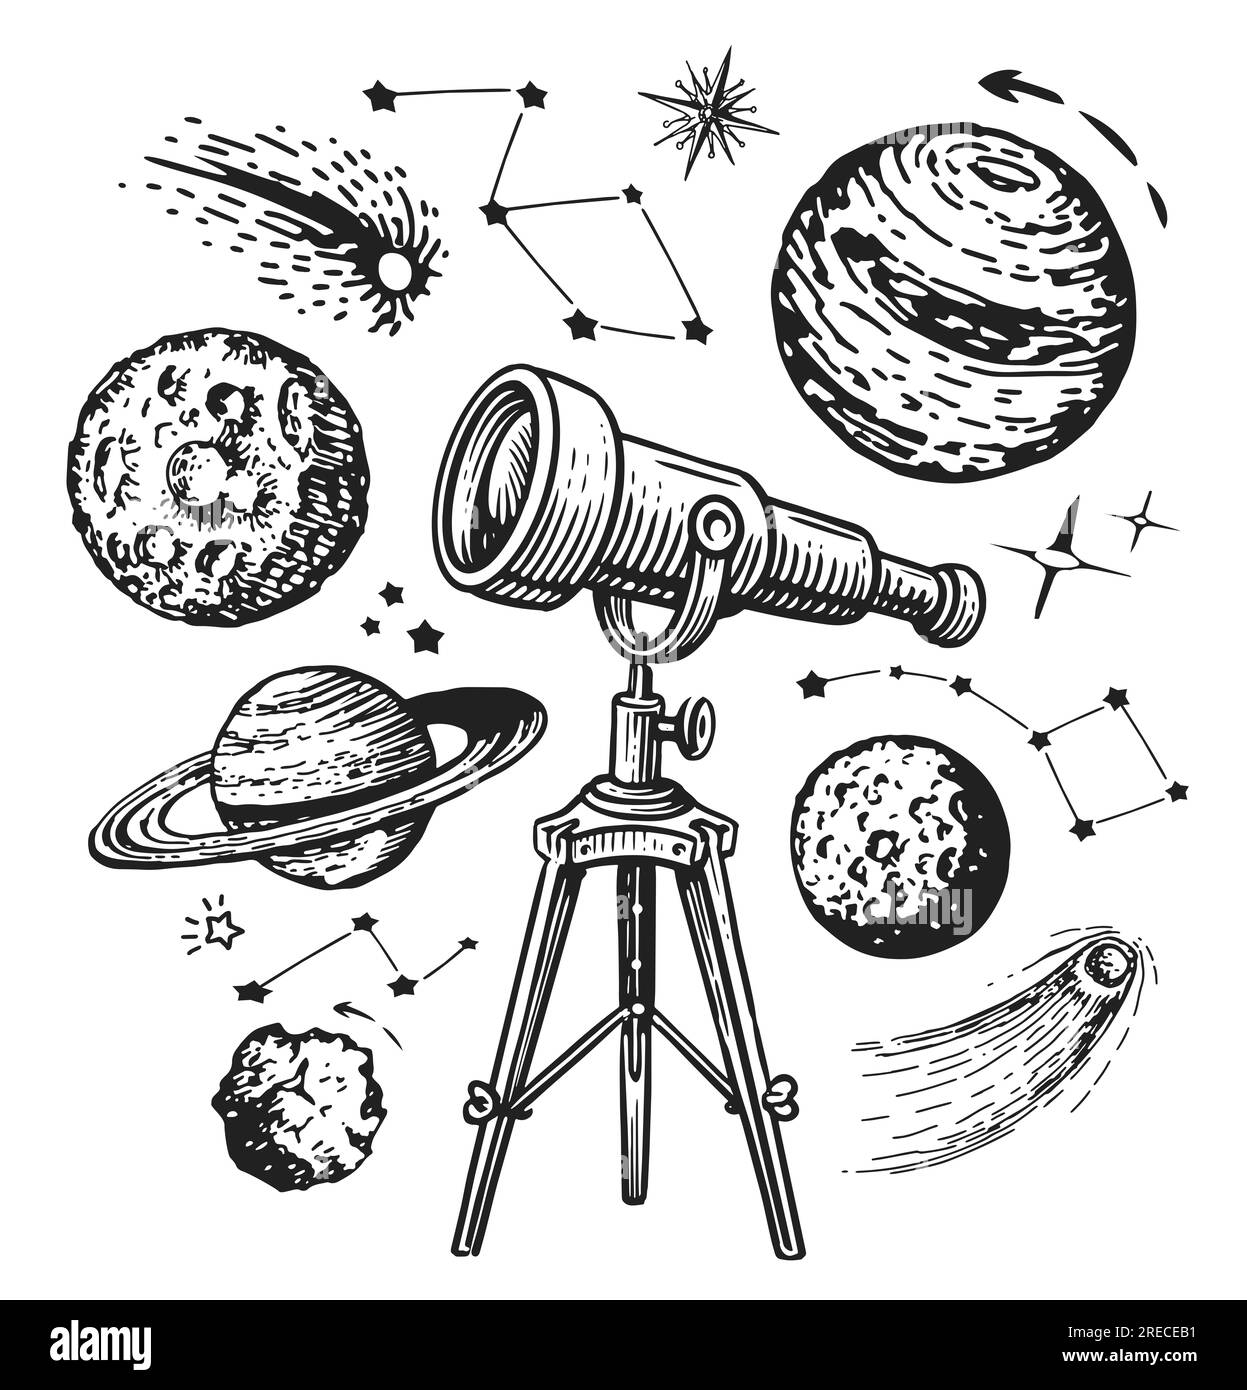 Retro telescope looks at planets and stars. Galaxy, outer space concept. Hand drawn sketch vintage illustration Stock Photo